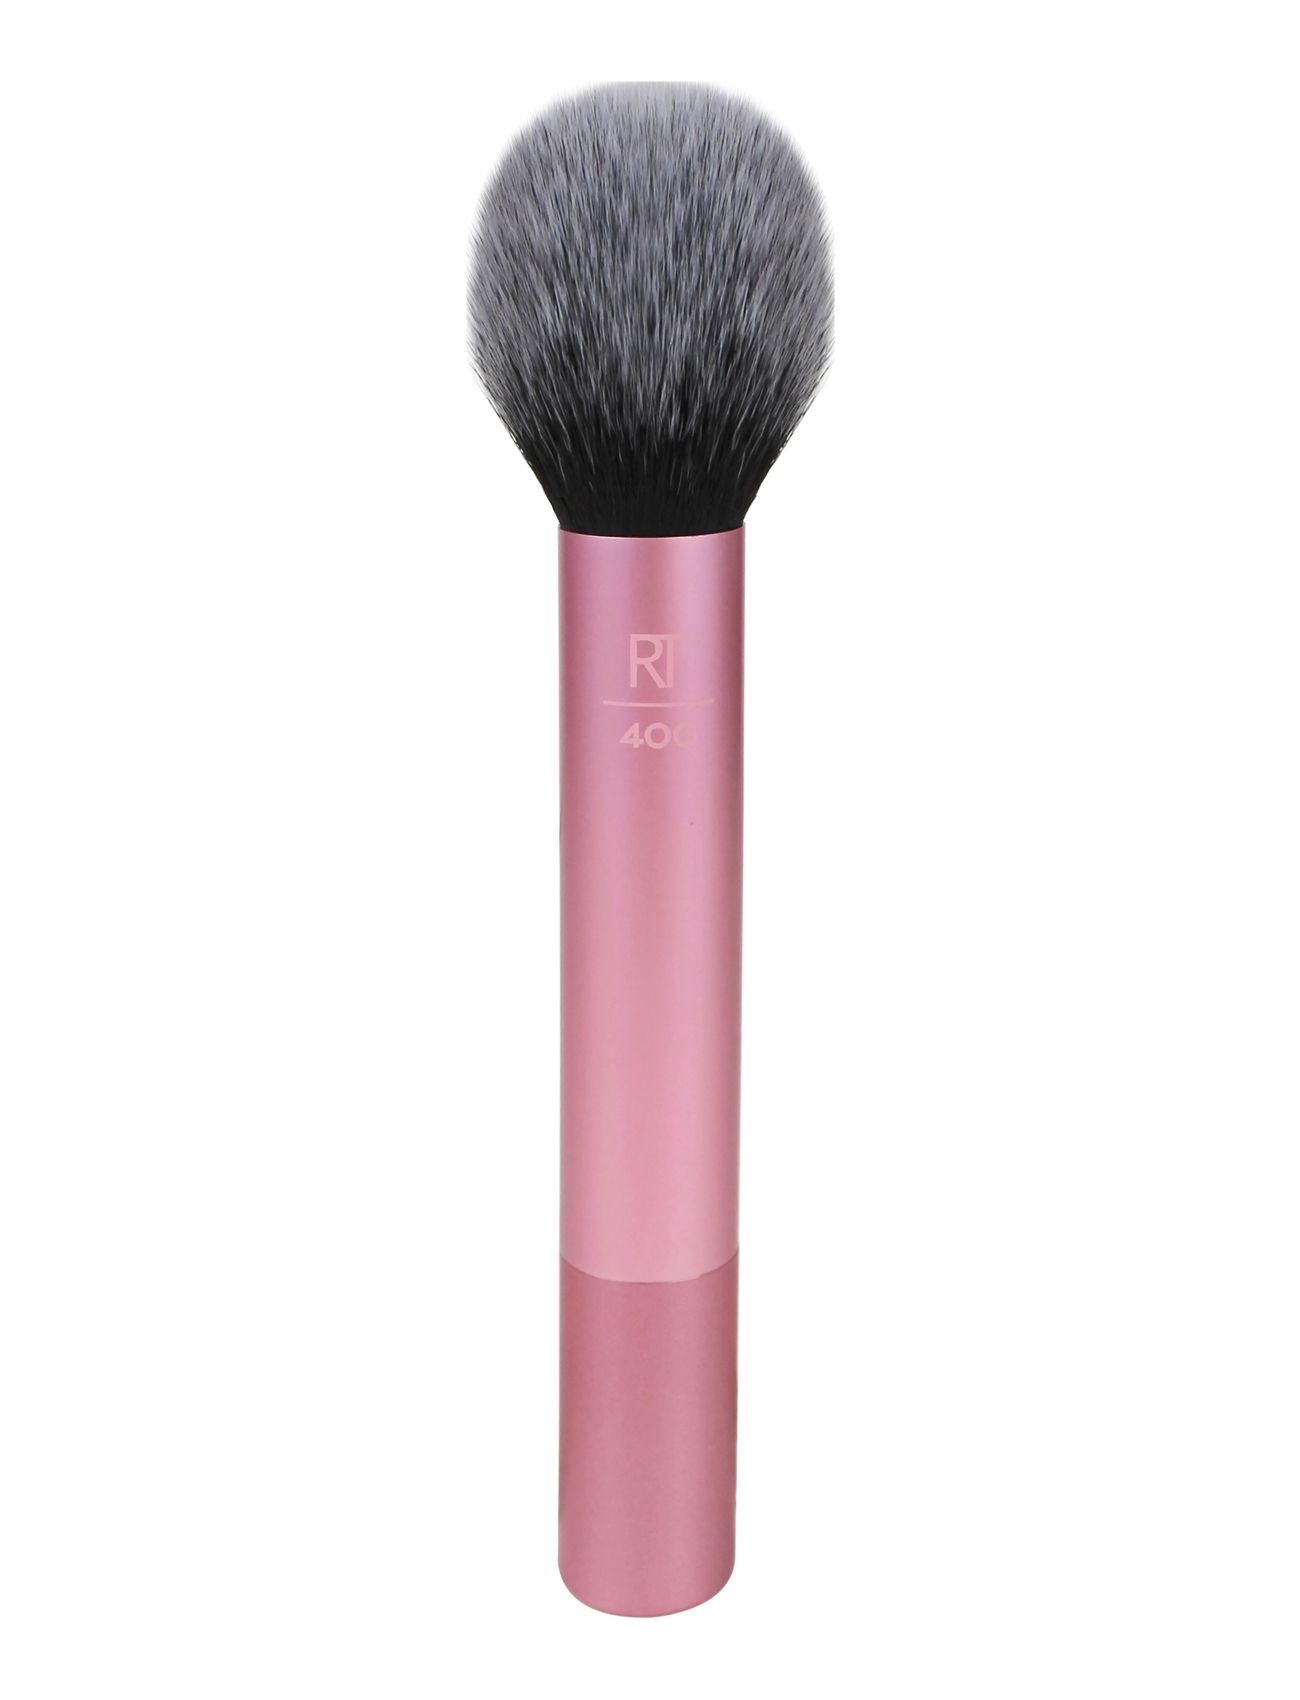 Real Techniques Blush Brush Multilingual Beauty WOMEN Makeup Makeup Brushes Face Brushes Blush Brushes Rosa Real Techniques